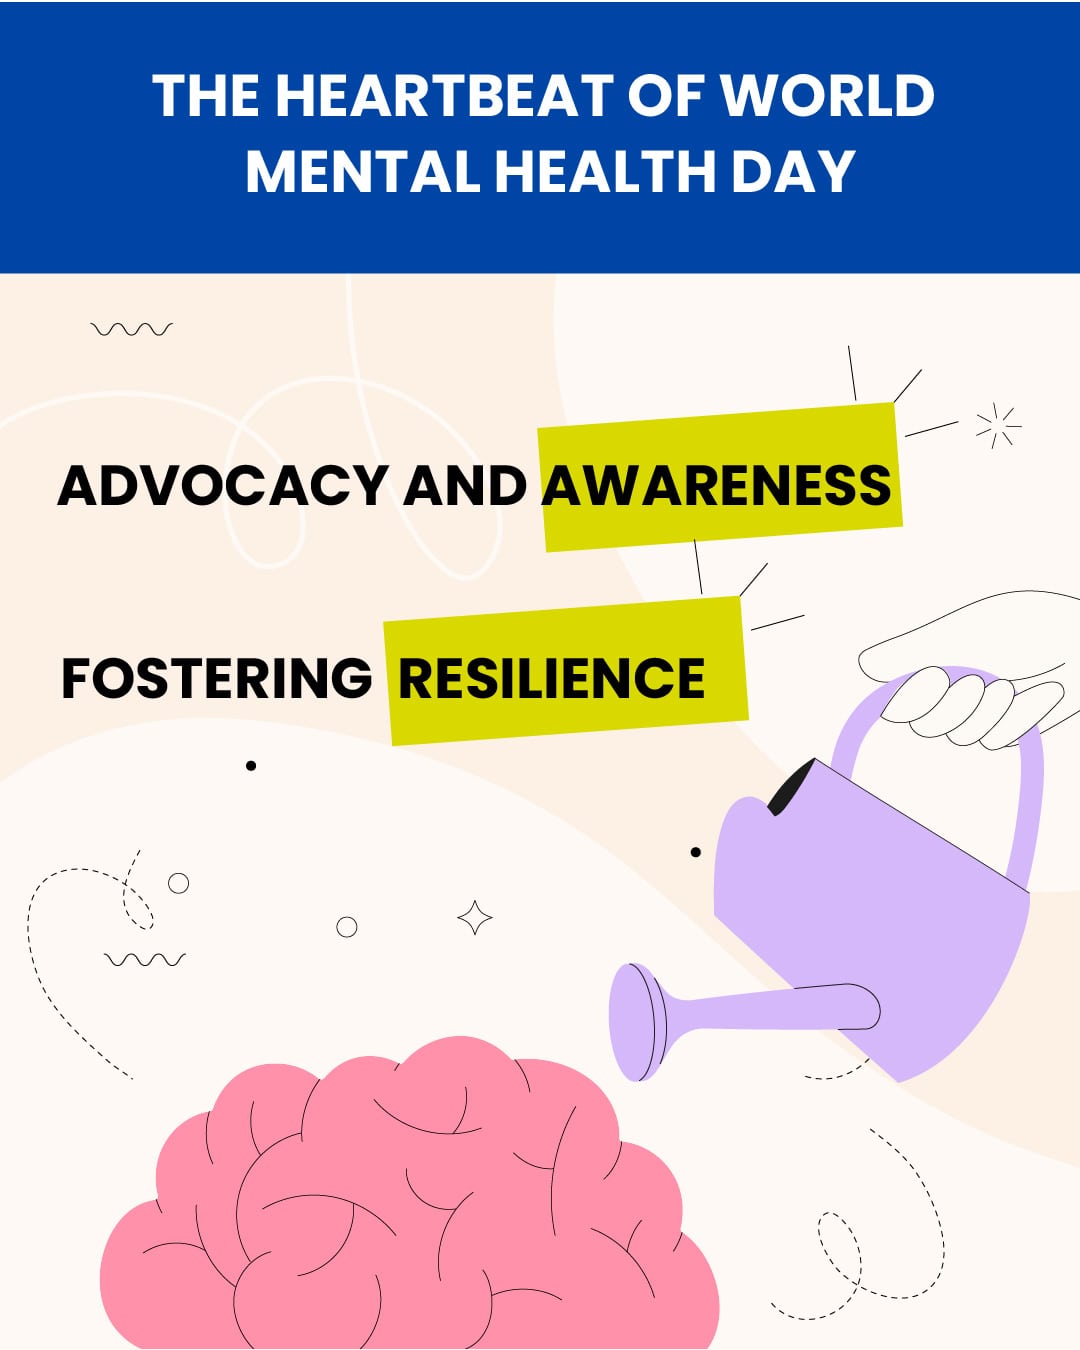 Graphic representation with text "THE HEARTBEAT OF WORLD MENTAL HEALTH DAY", highlighting "ADVOCACY AND AWARENESS" and "FOSTERING RESILIENCE"